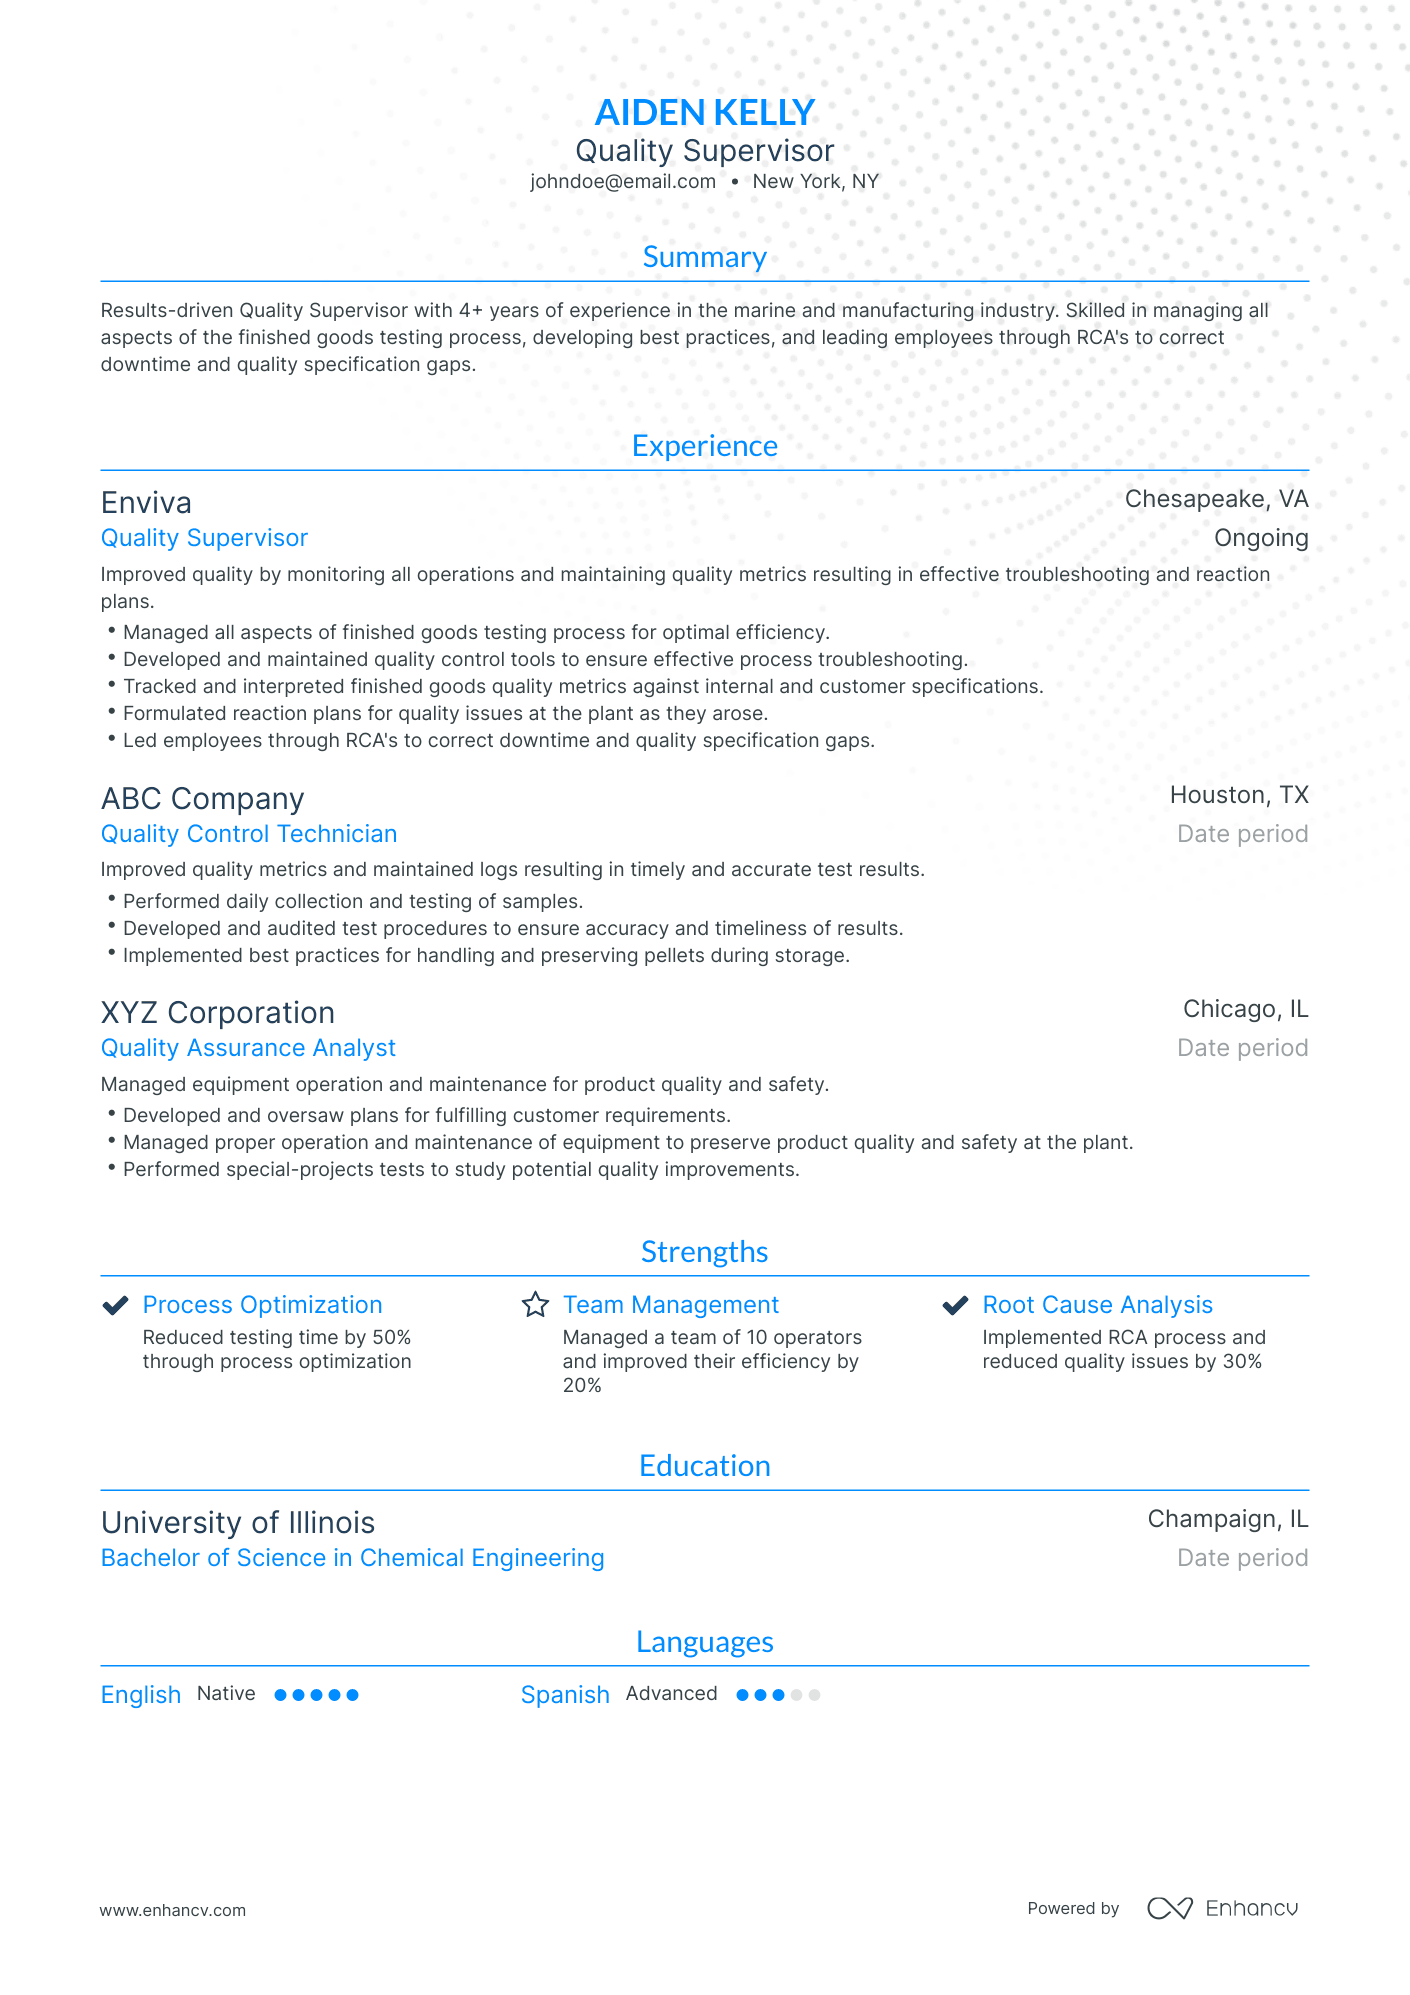 Traditional Quality Supervisor Resume Template